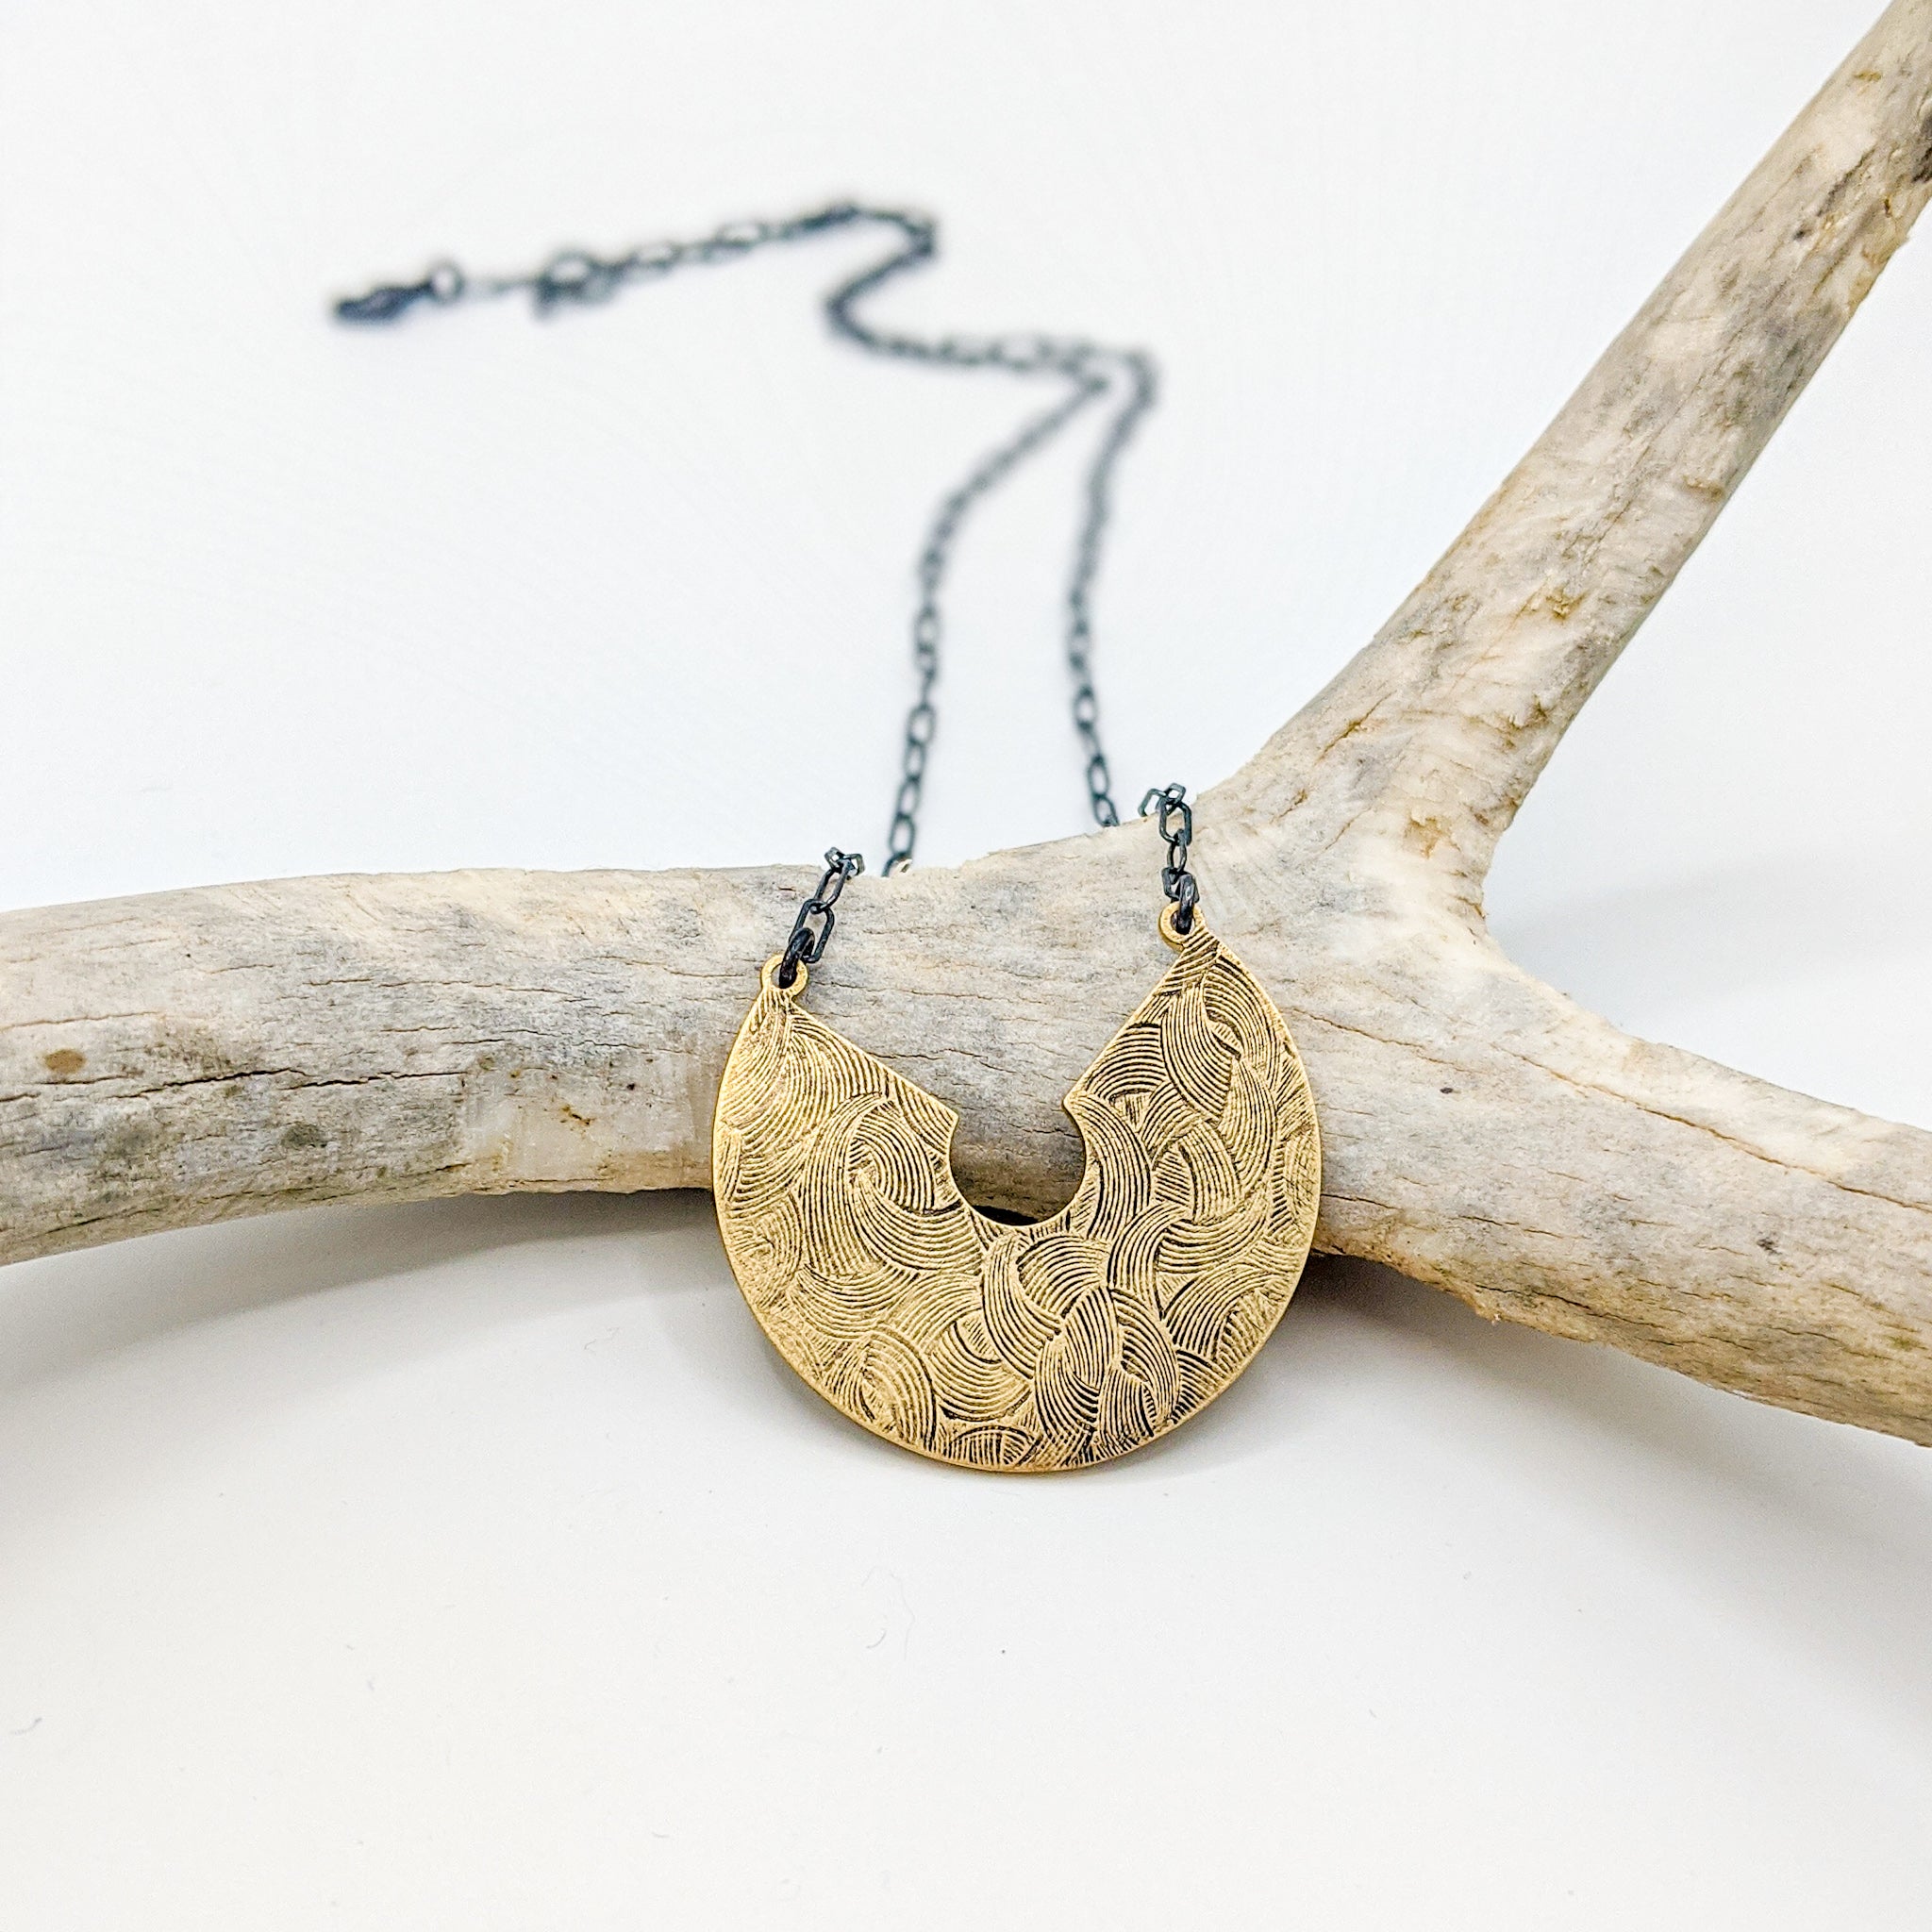 Half Circle Necklace - Brass and Dark Silver Mixed Metal Geometric